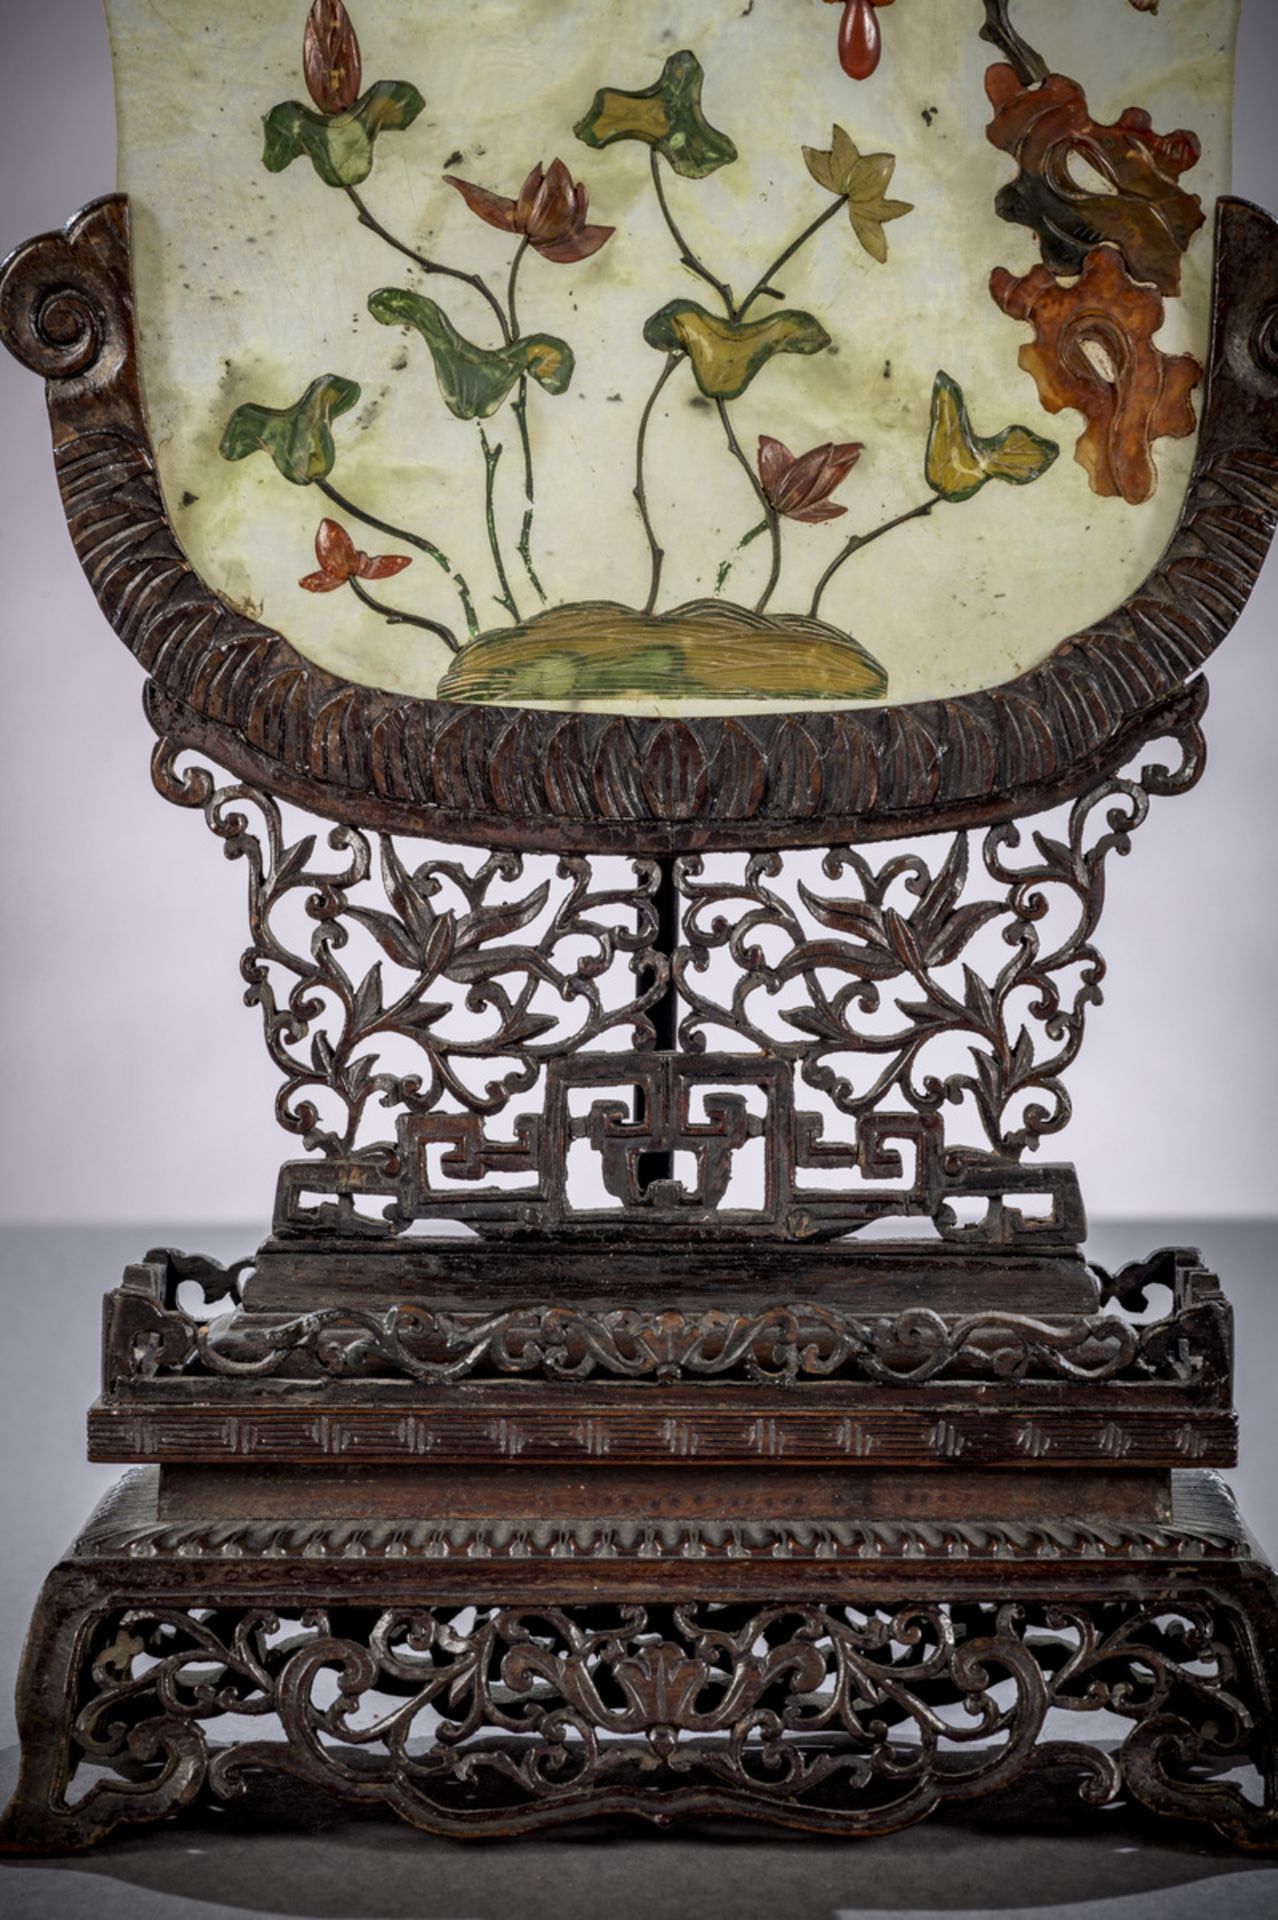 A pair of Chinese table screens with inlaywork on wooden pedestals (44x20x10 cm) (*) - Image 4 of 6